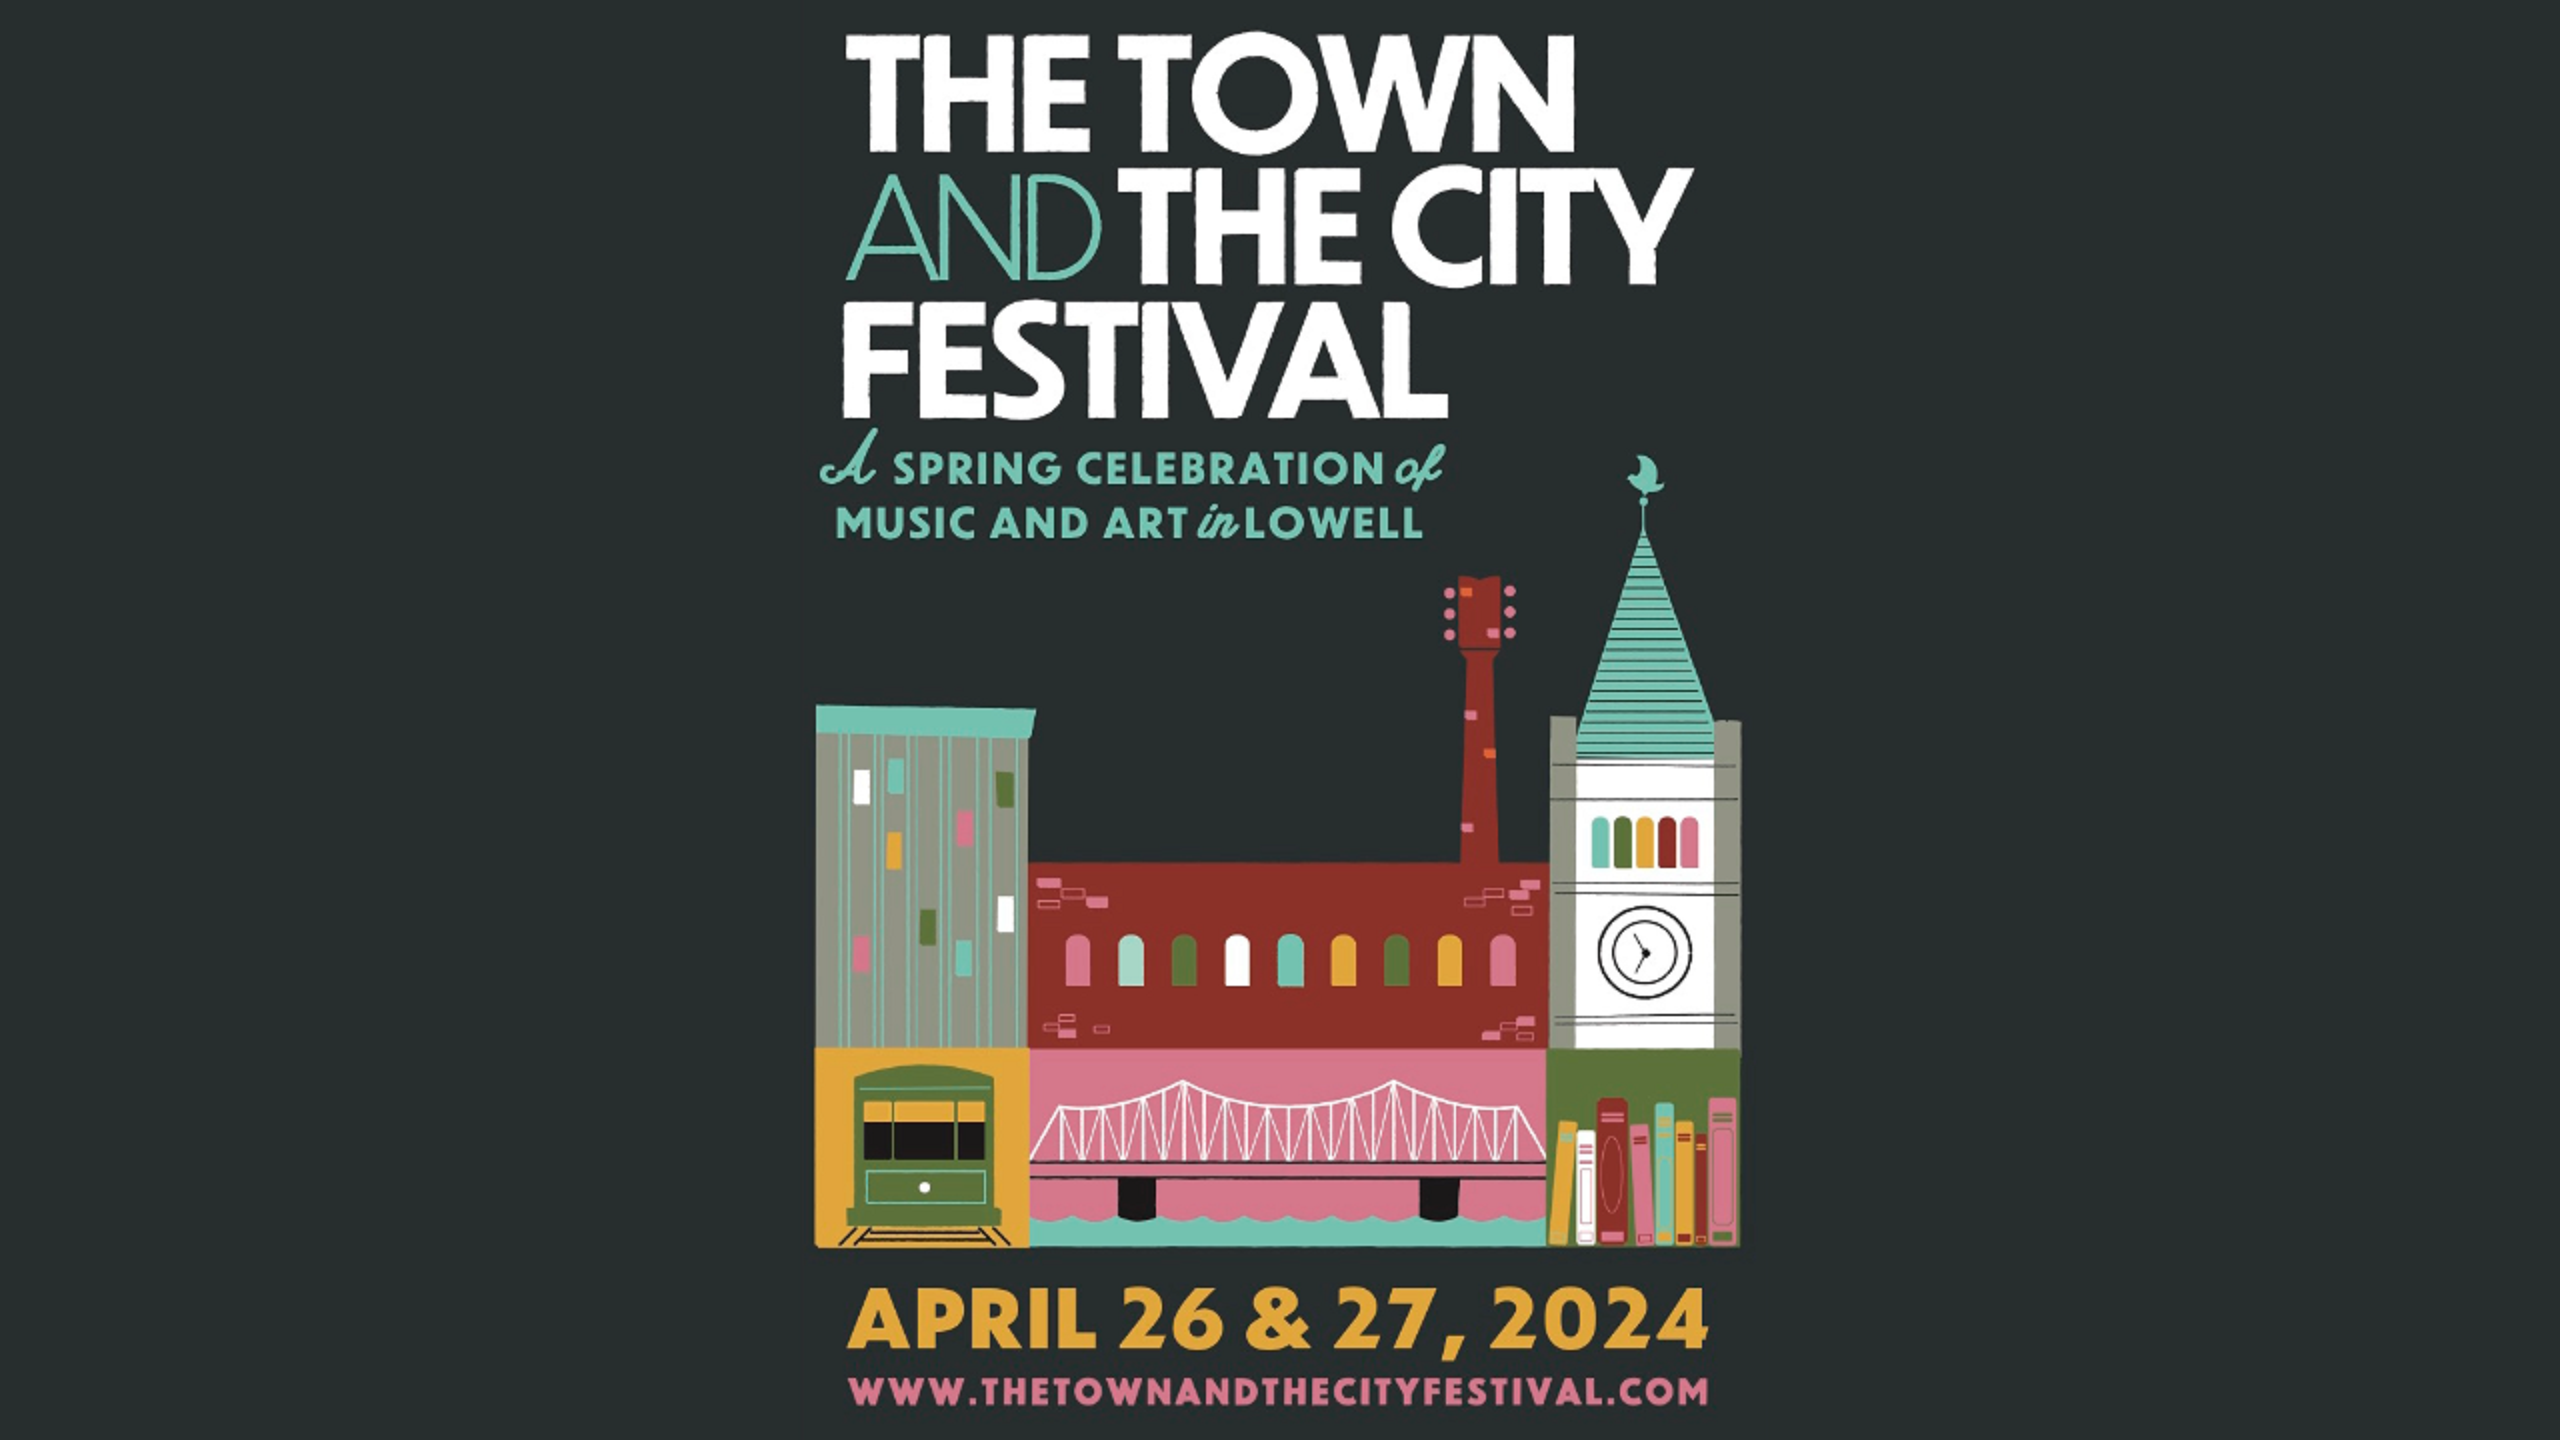 THE TOWN AND THE CITY FESTIVAL ANNOUNCES ADDITIONAL ARTISTS, NEW PROGRAMMING, AND VENUES APRIL 26 & 27 IN LOWELL, MA